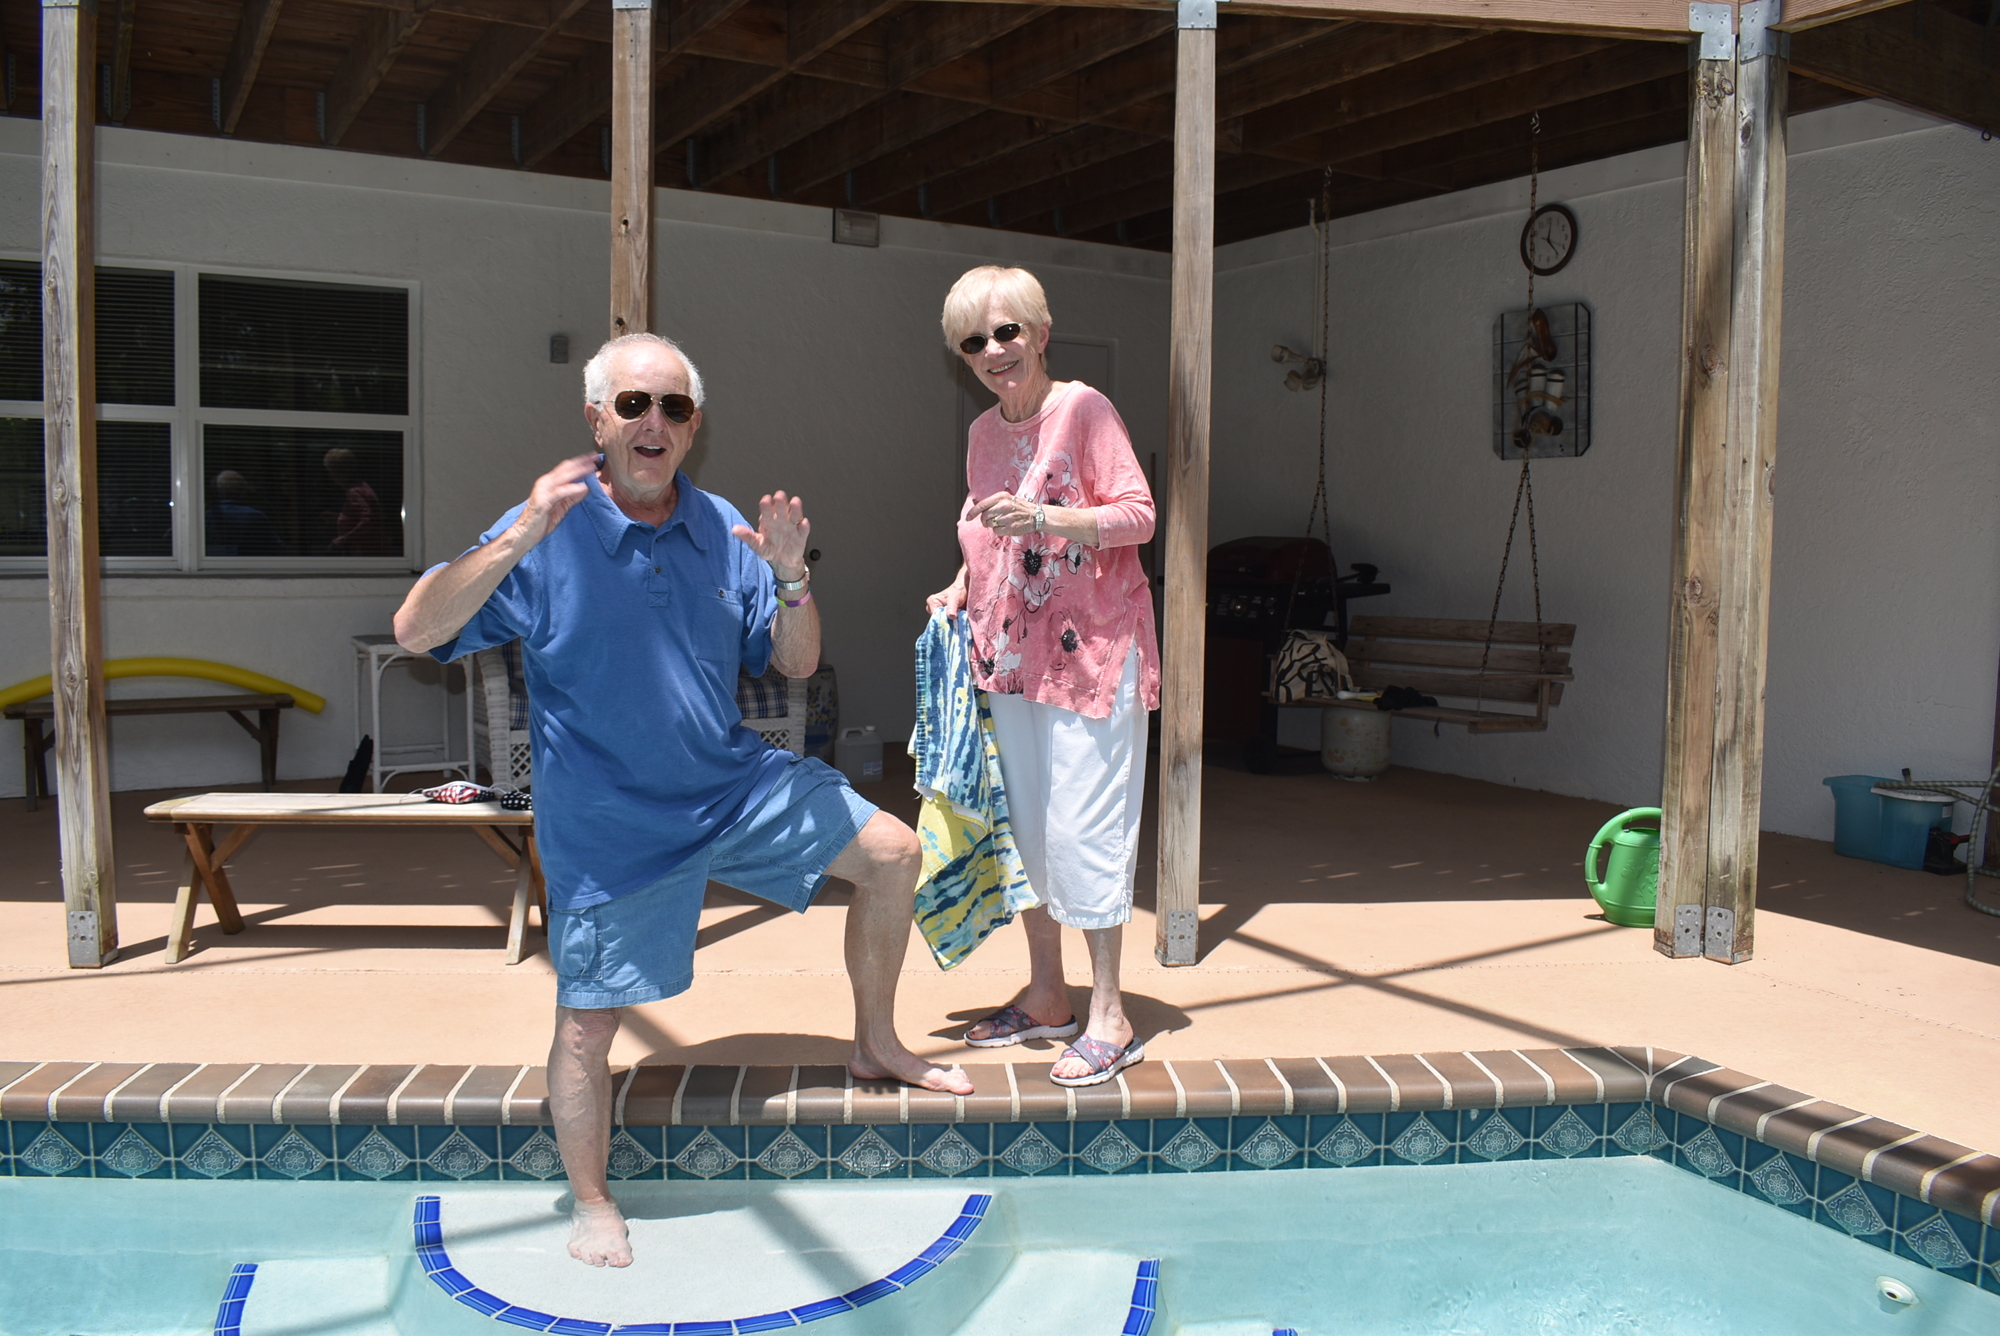 Duane and Karen Compton take advantage of their pool during the hot summer.